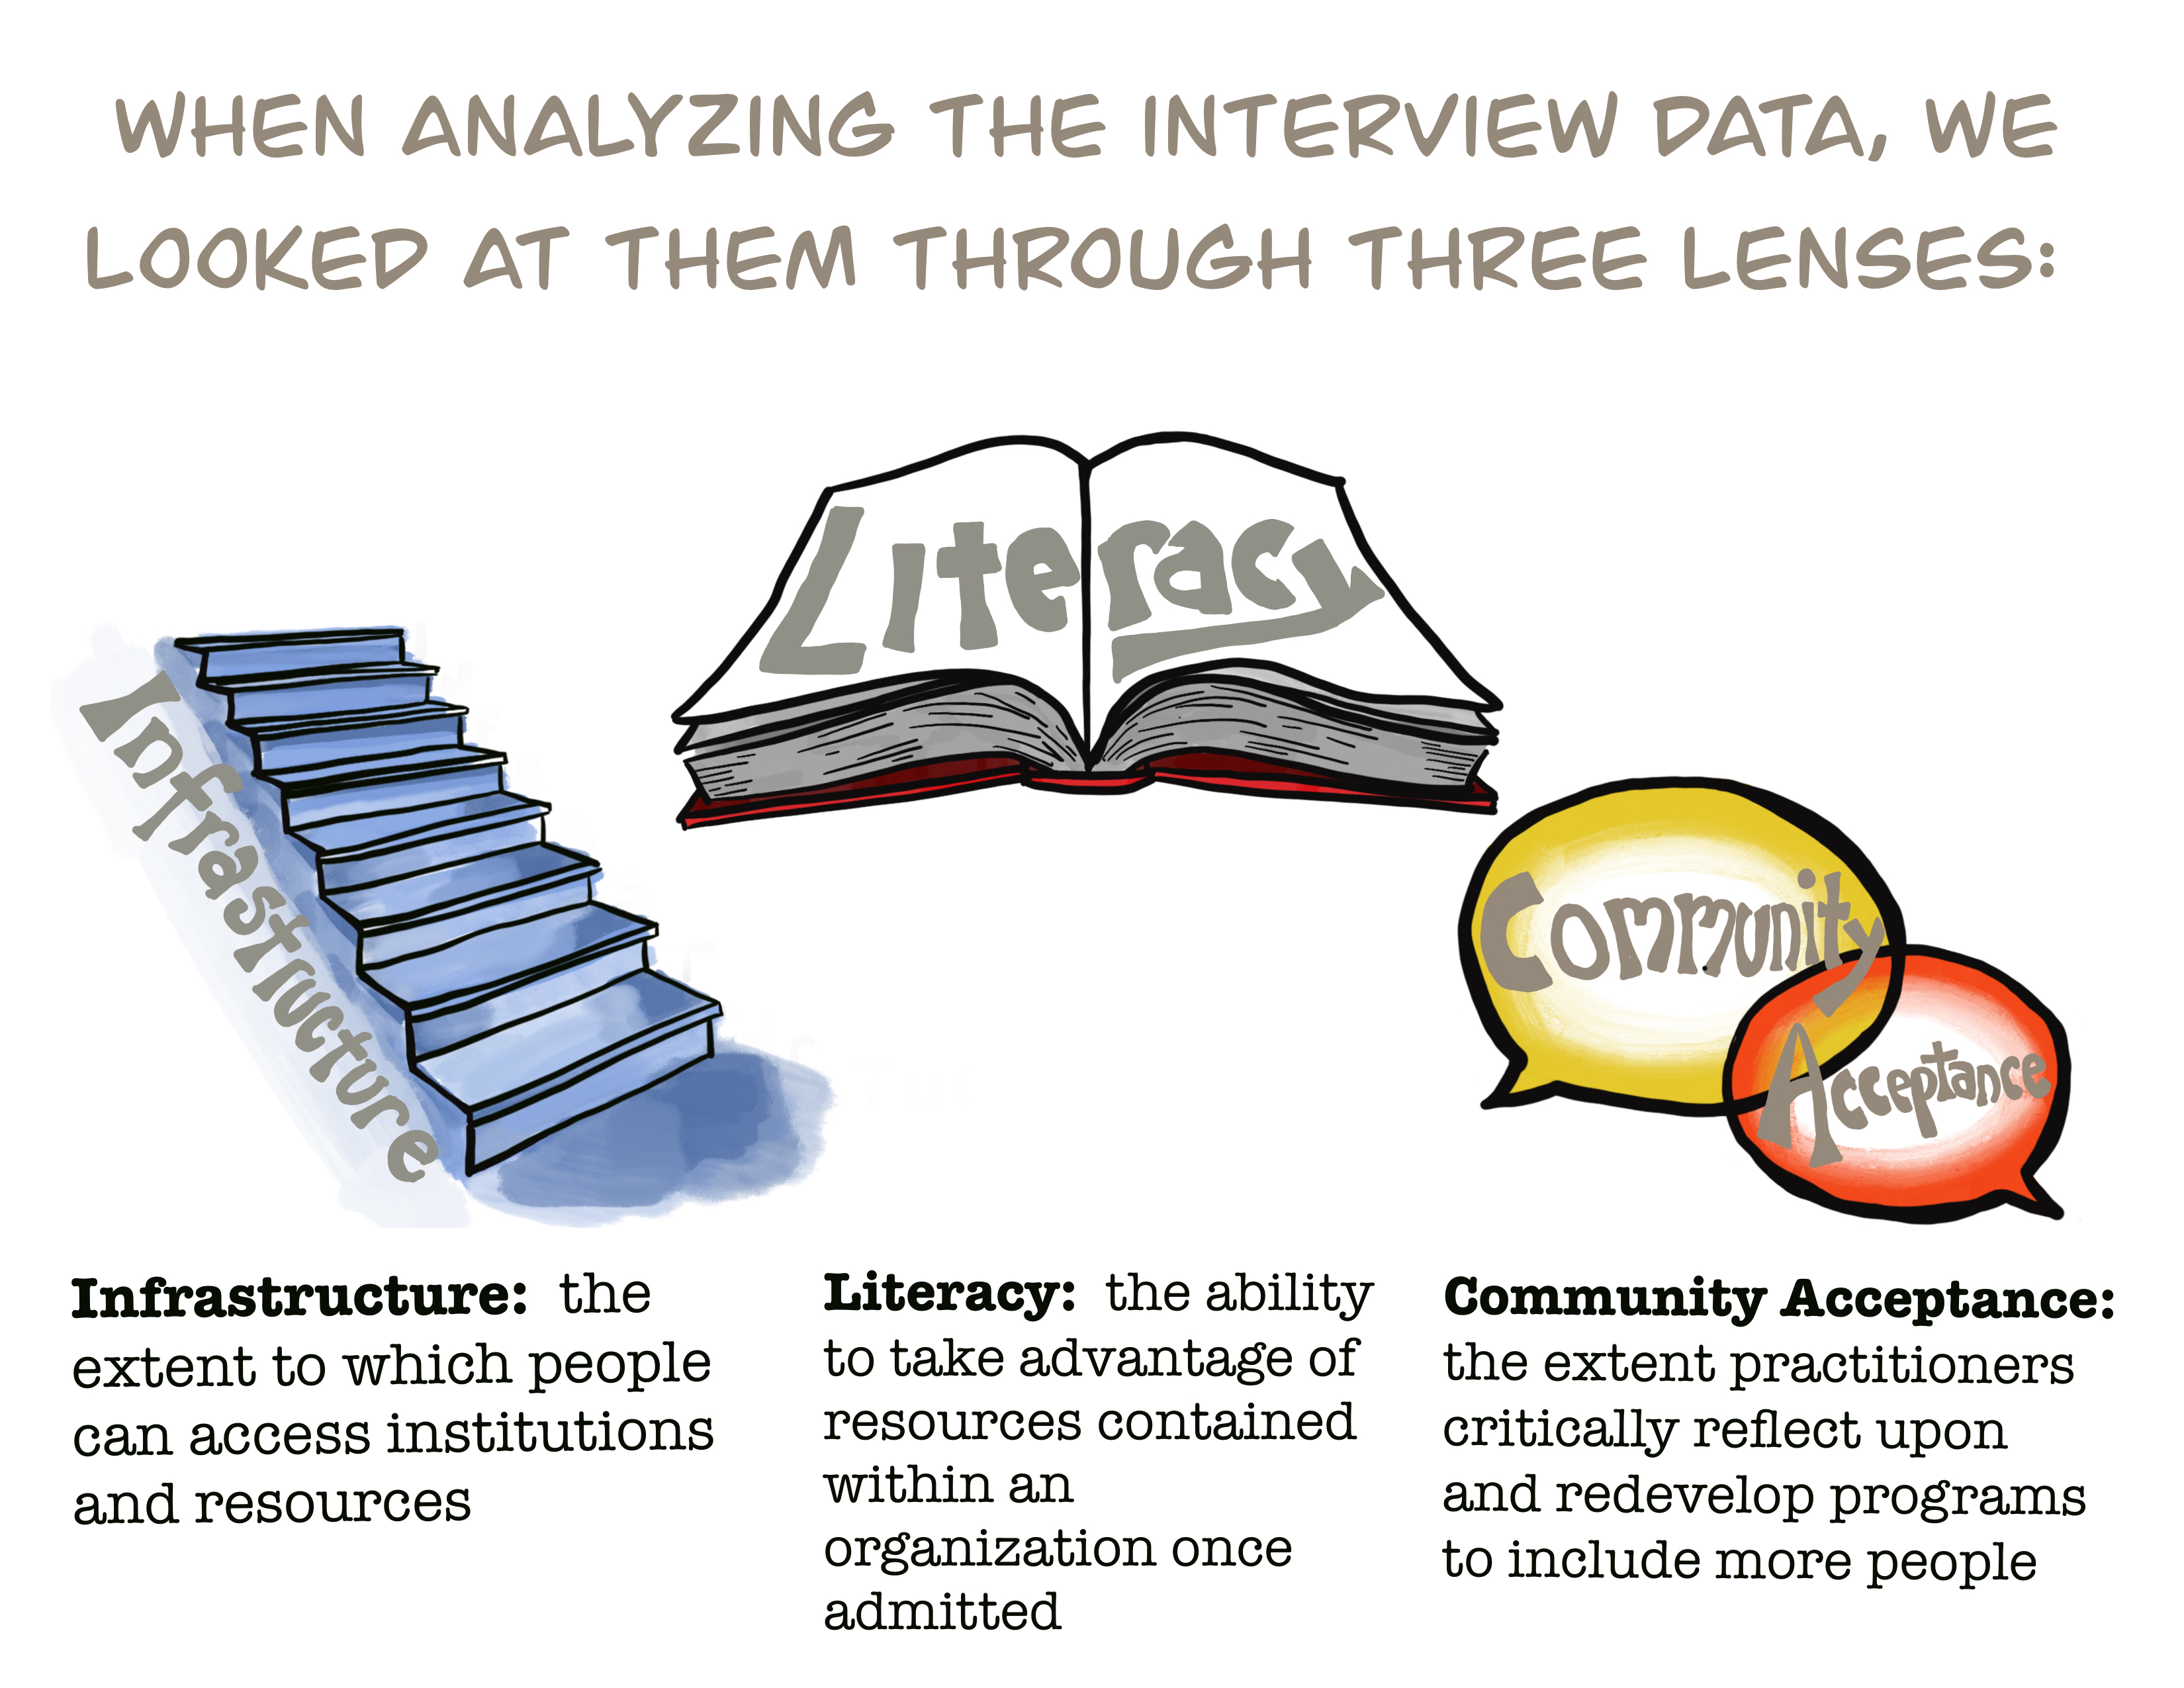 When analyzing the interview data, we looked at them through three lenses. Infrastructure: the extent to which people can access institutions and resources. Literacy: the ability to take advantage of resources contained within an organization once admitted. Community acceptance: the extent practitioners critically reflect upon and redevelop programs to include more people.